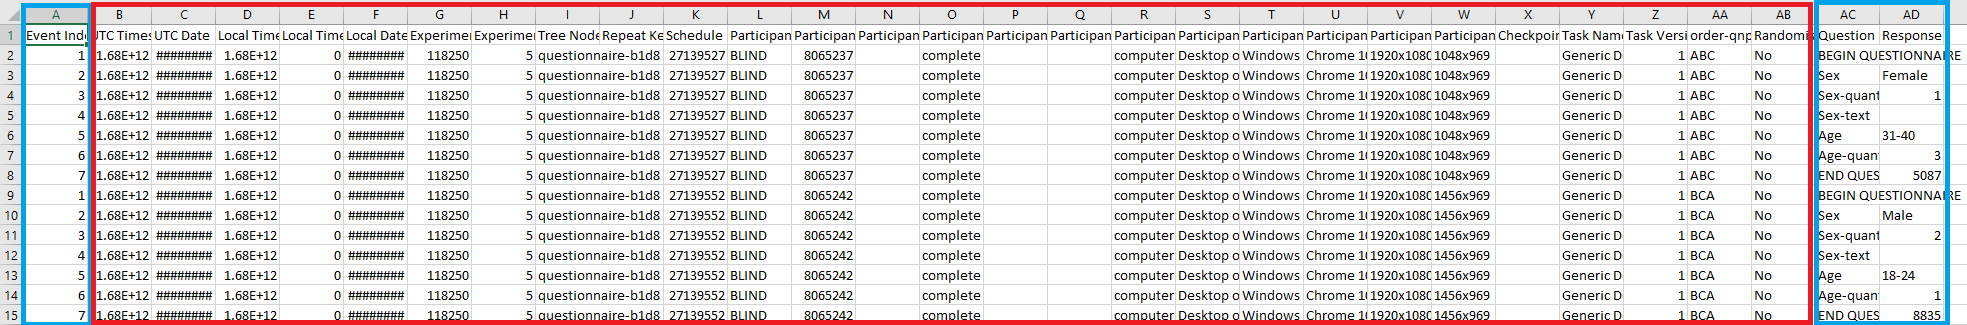 Screenshot of MS Excel, columns B-AB are highlighted in red, and columns A, AC, and AD are highlighted in blue.